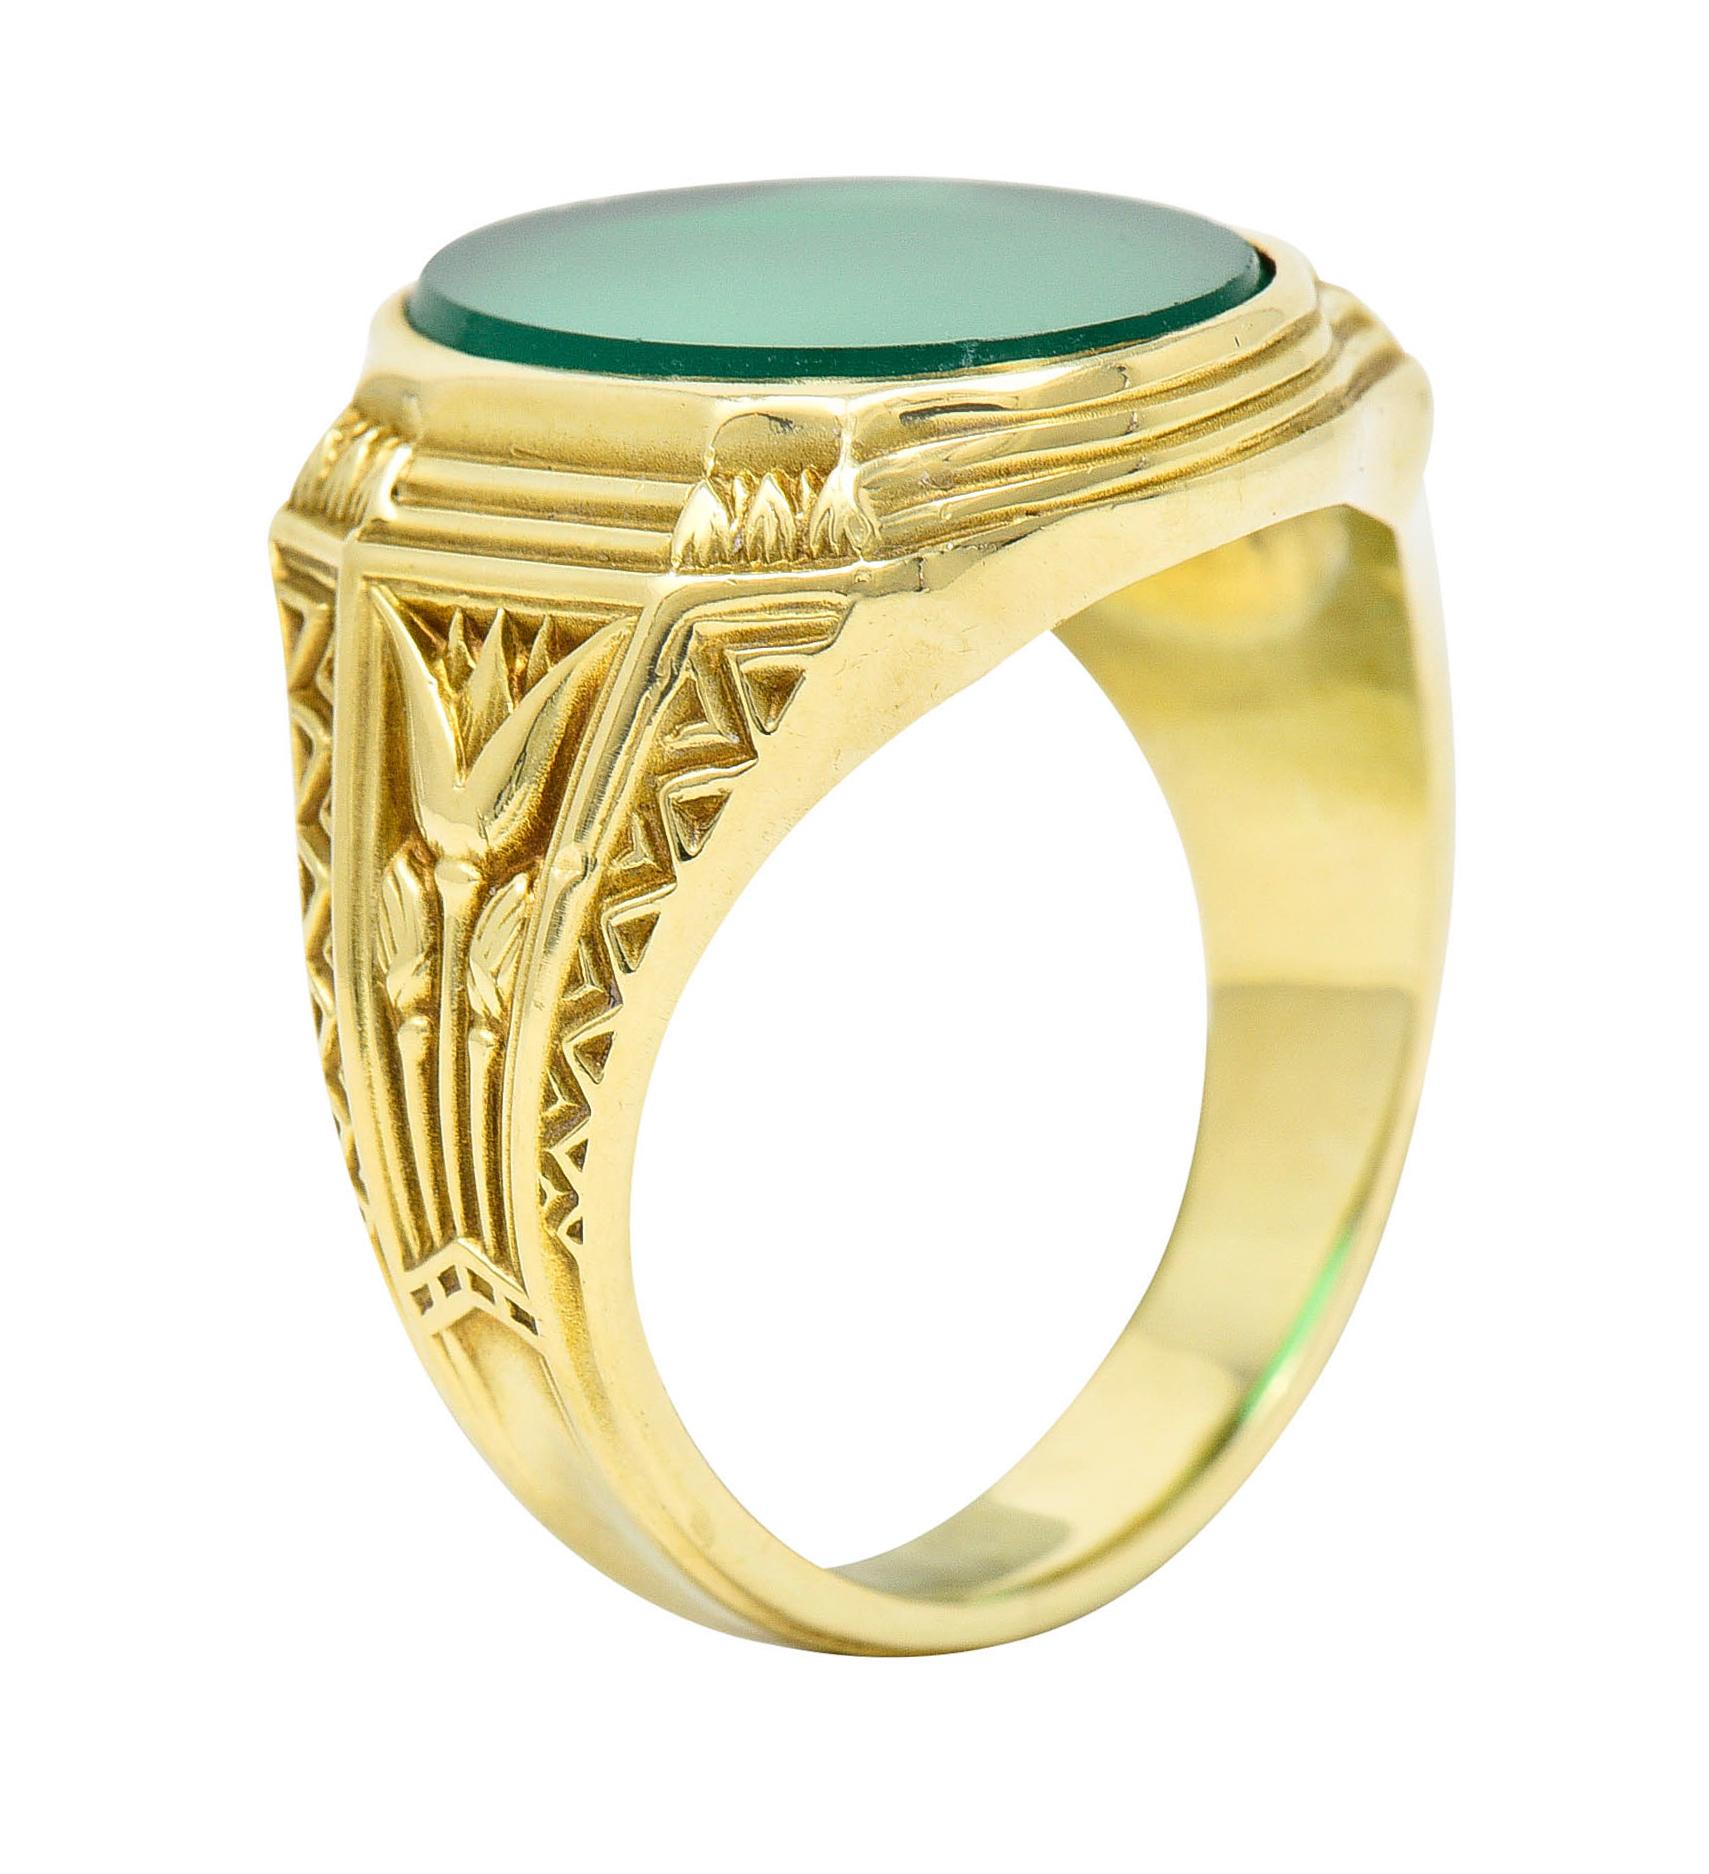 Signet style ring centers an oval tablet of chrysoprase measuring approximately 15.3 x 11.3 mm

Bezel set, translucent, and with uniform apple green color

With a deeply ridged surround and highly stylized lotus shoulders

With maker's mark and